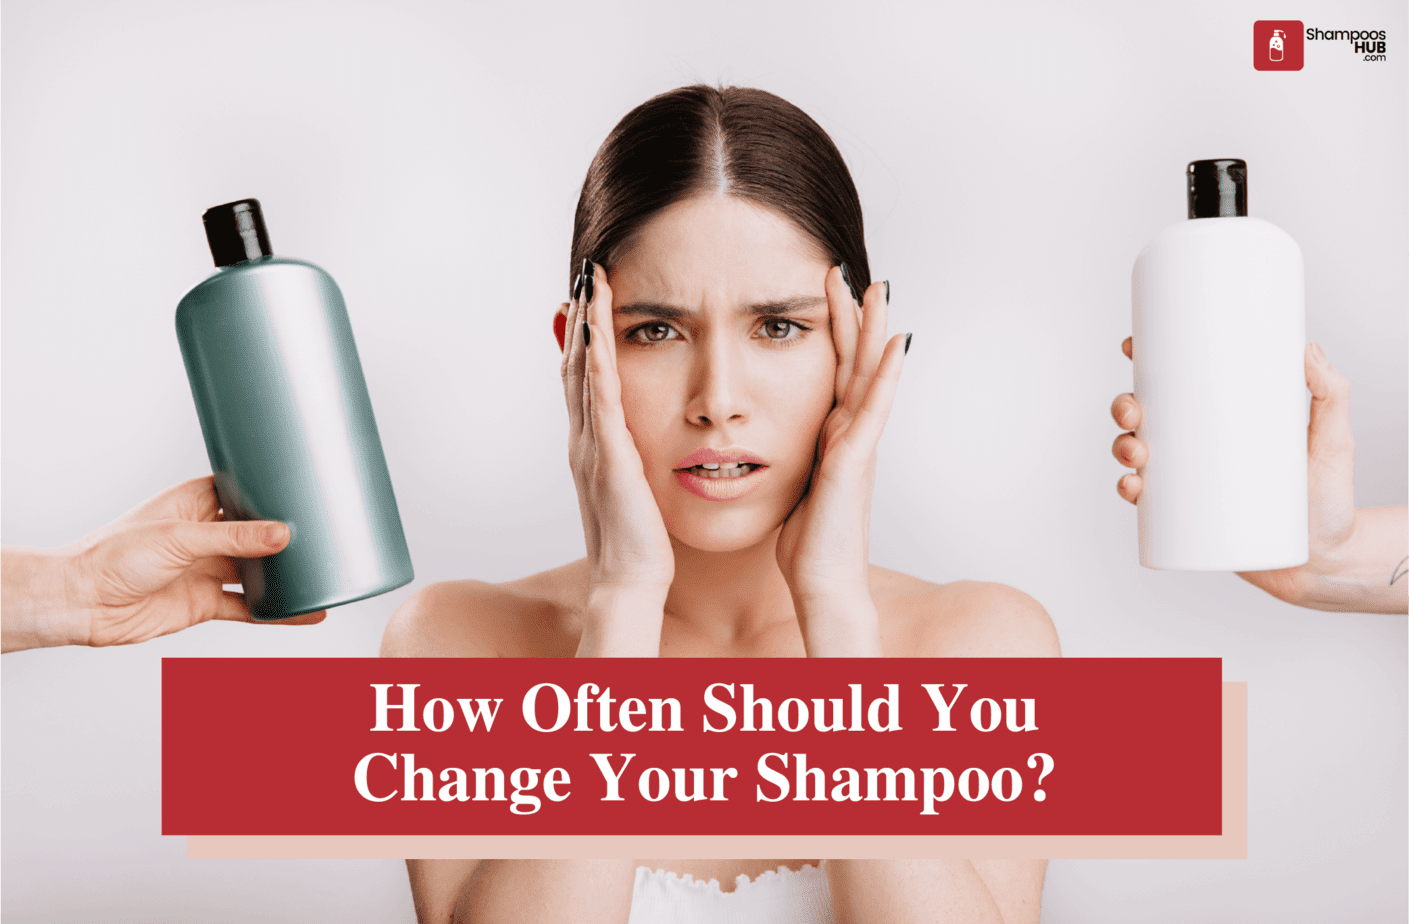 How Often Should You Change Your Shampoo?